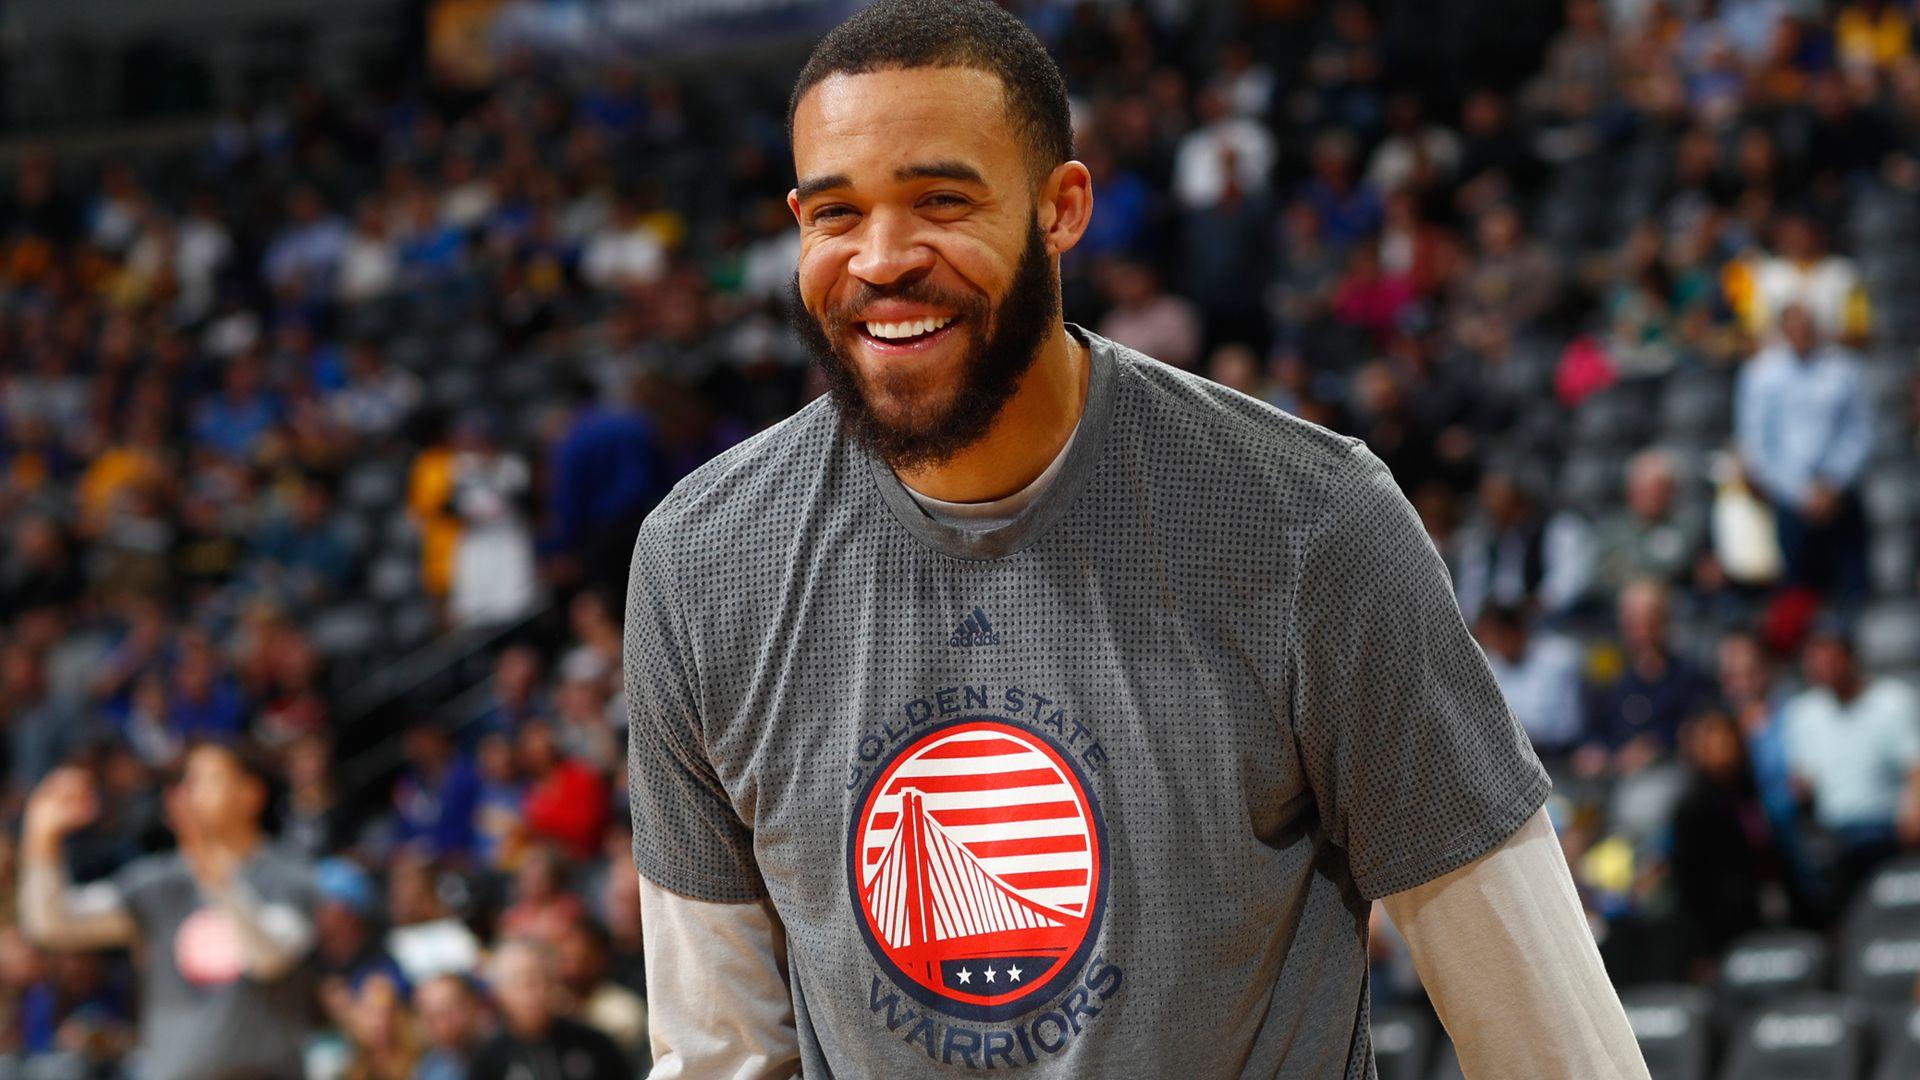 Winning cures all: 'Hyper, goofy' McGee fitting in with Warriors